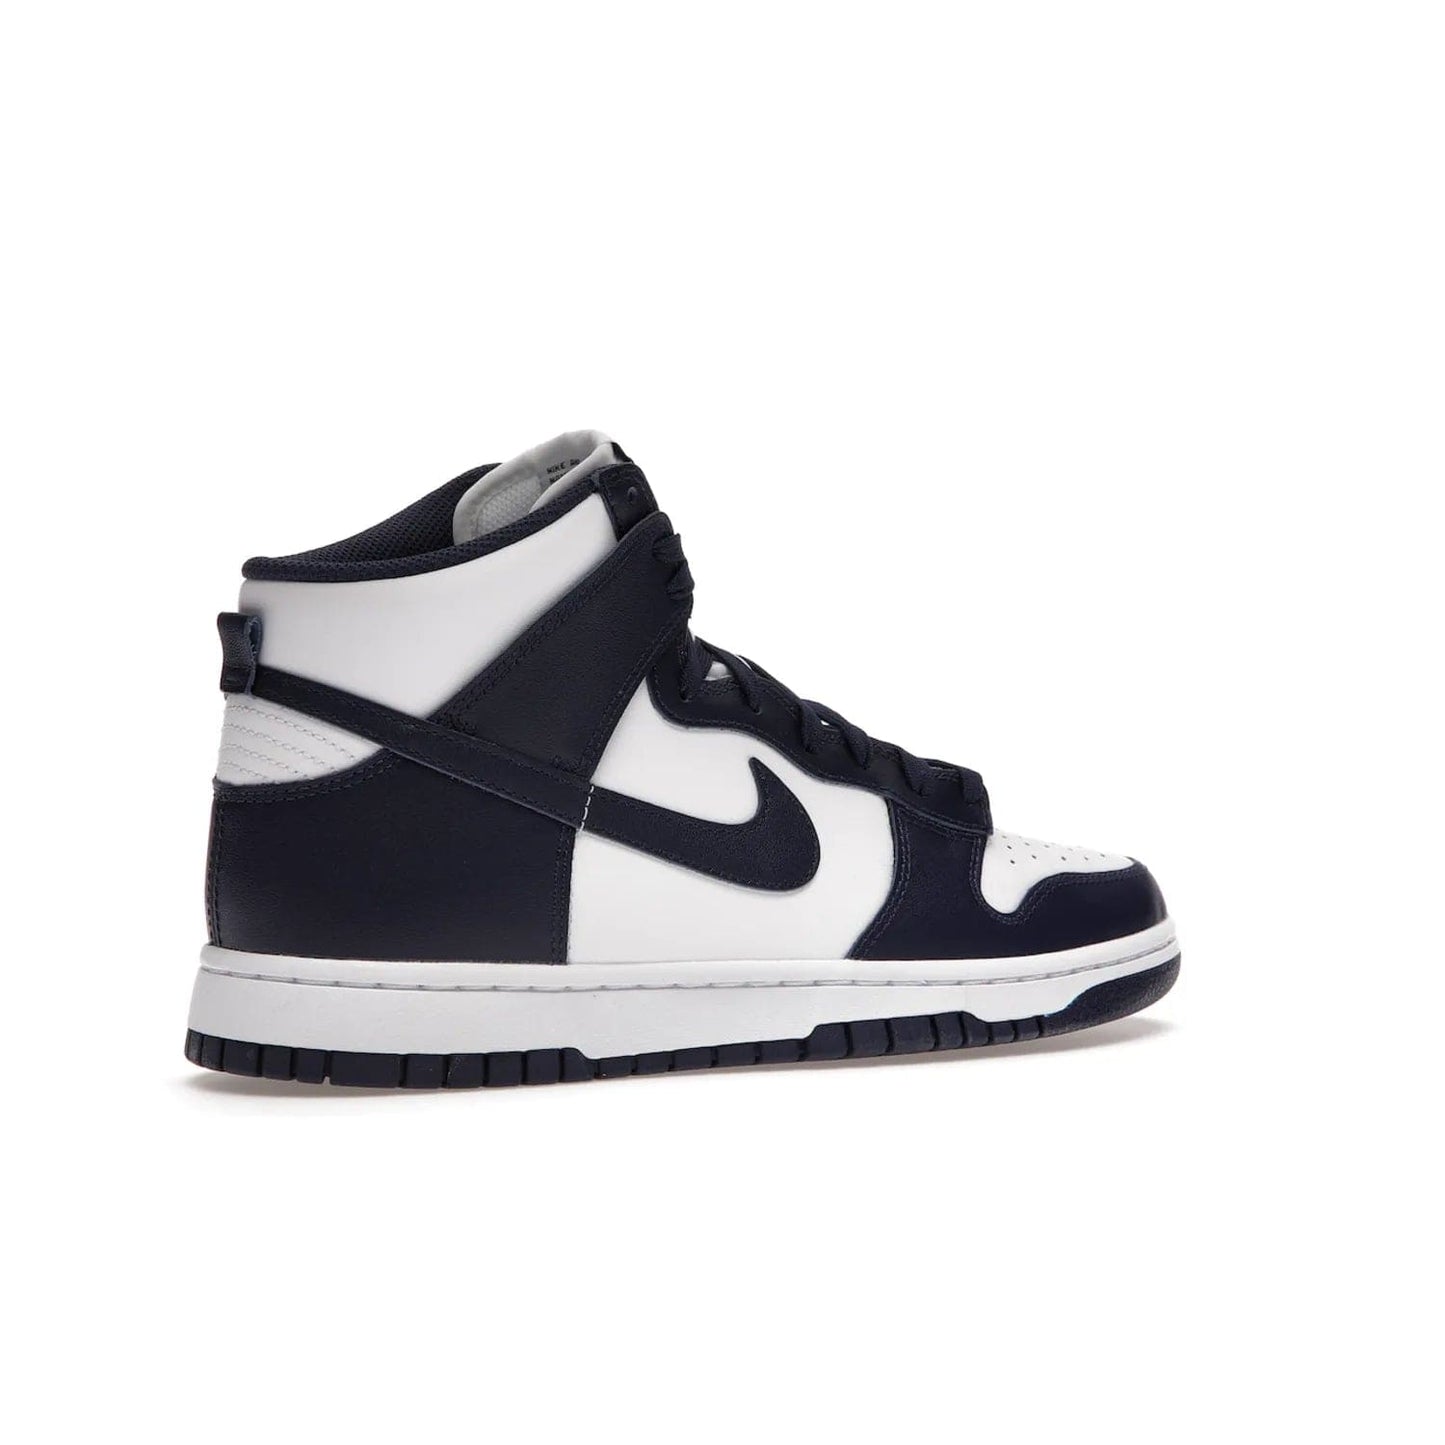 Nike Dunk High Championship Navy - Image 34 - Only at www.BallersClubKickz.com - Classic athletic style meets striking color-blocking on the Nike Dunk High Championship Navy. A white leather upper with Championship Navy overlays creates a retro look with a woven tongue label and sole. Unleash your inner champion with the Nike Dunk High Championship Navy.